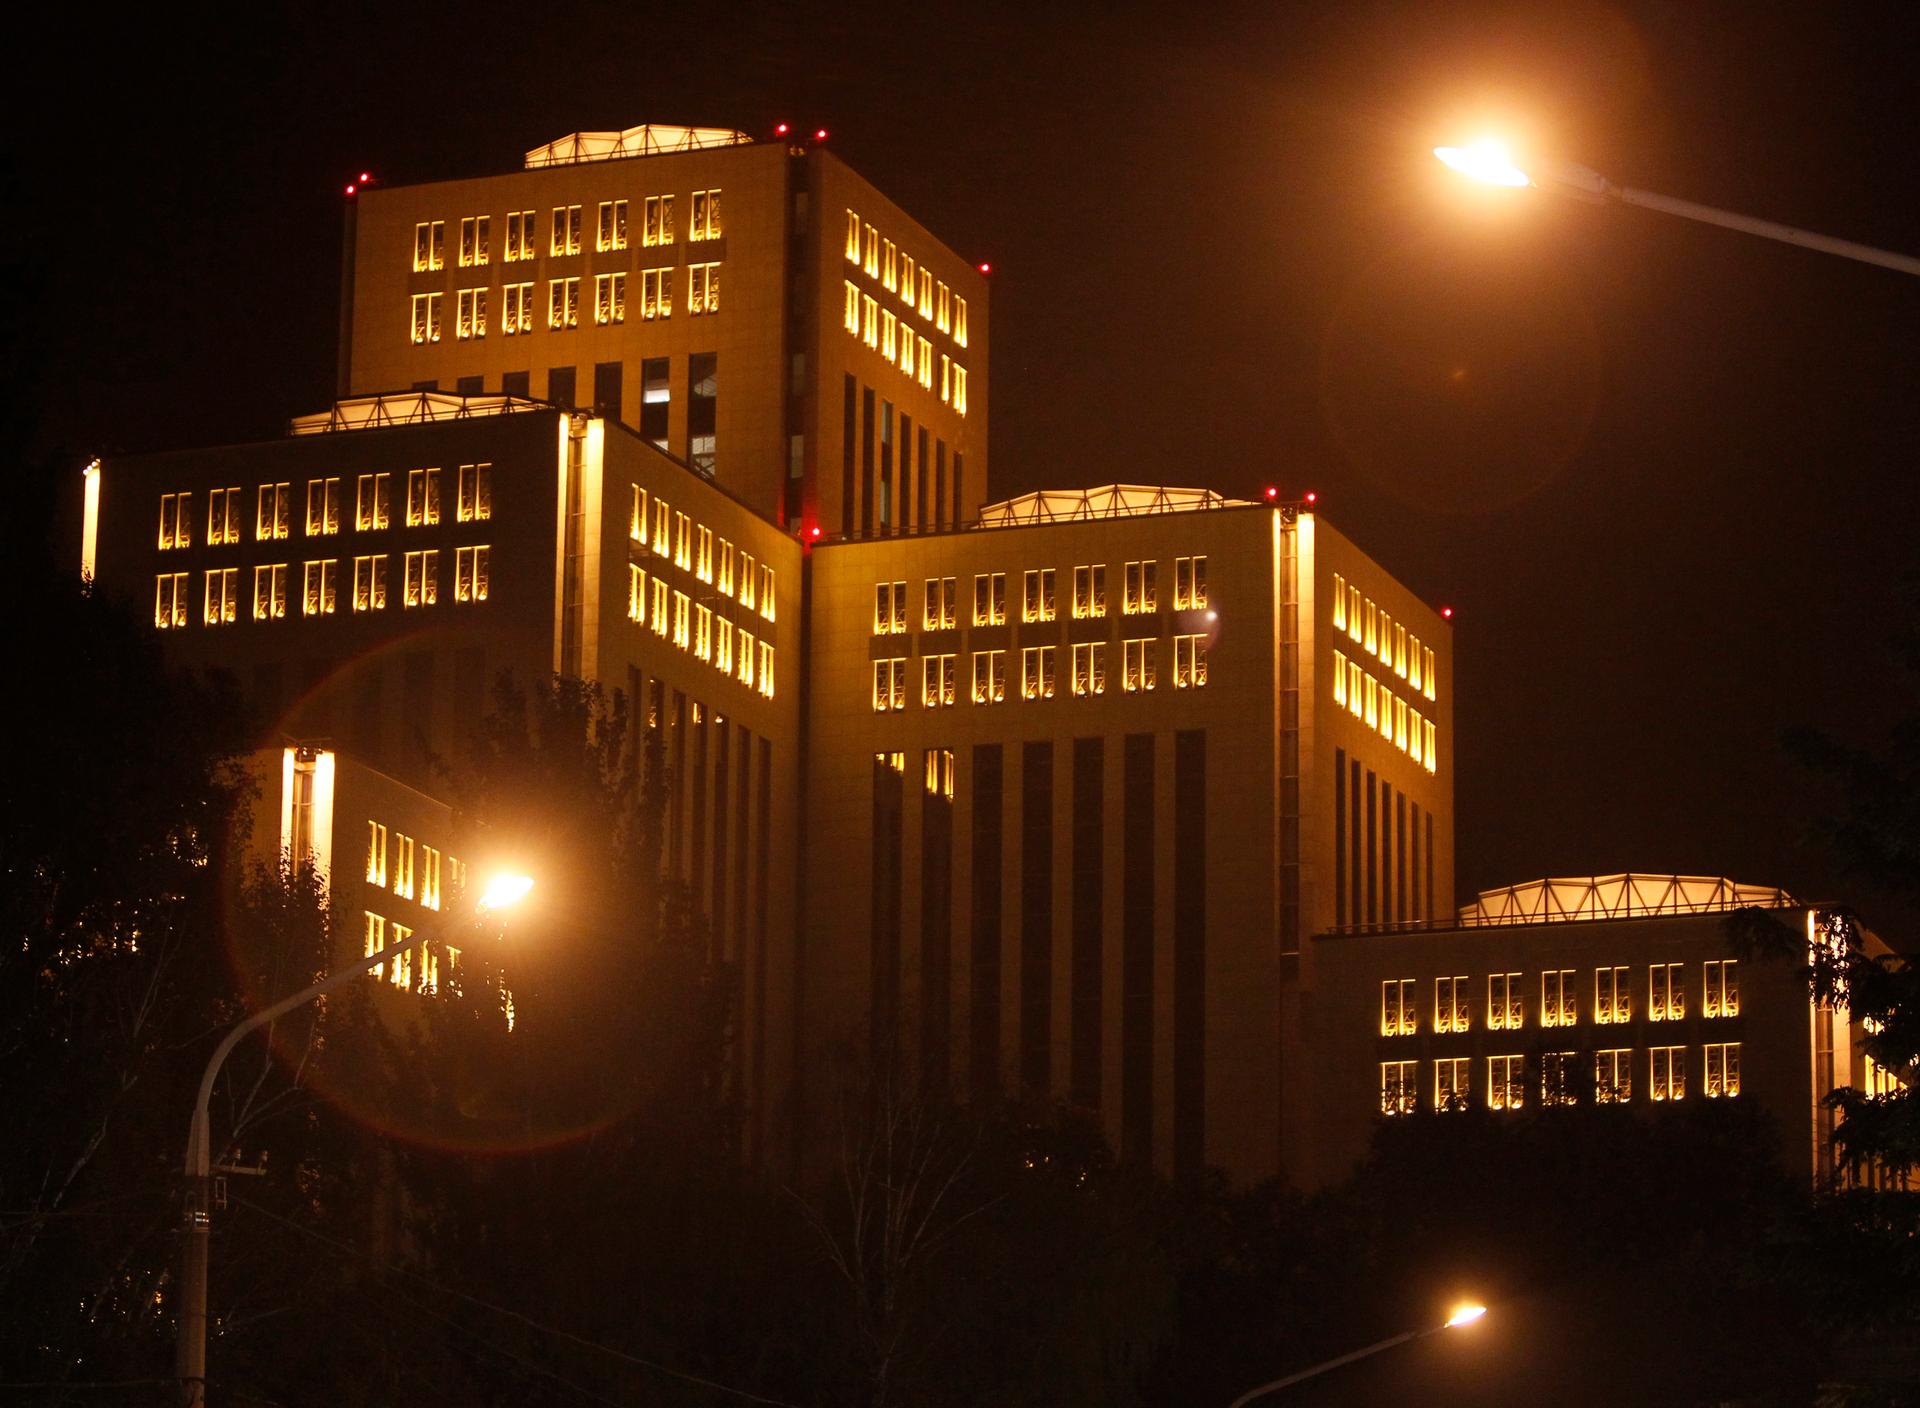 The Jewish Menorah Center in Dnipropetrovsk, Ukraine, in October 2012, just after it opened. It's the world's biggest Jewish center.